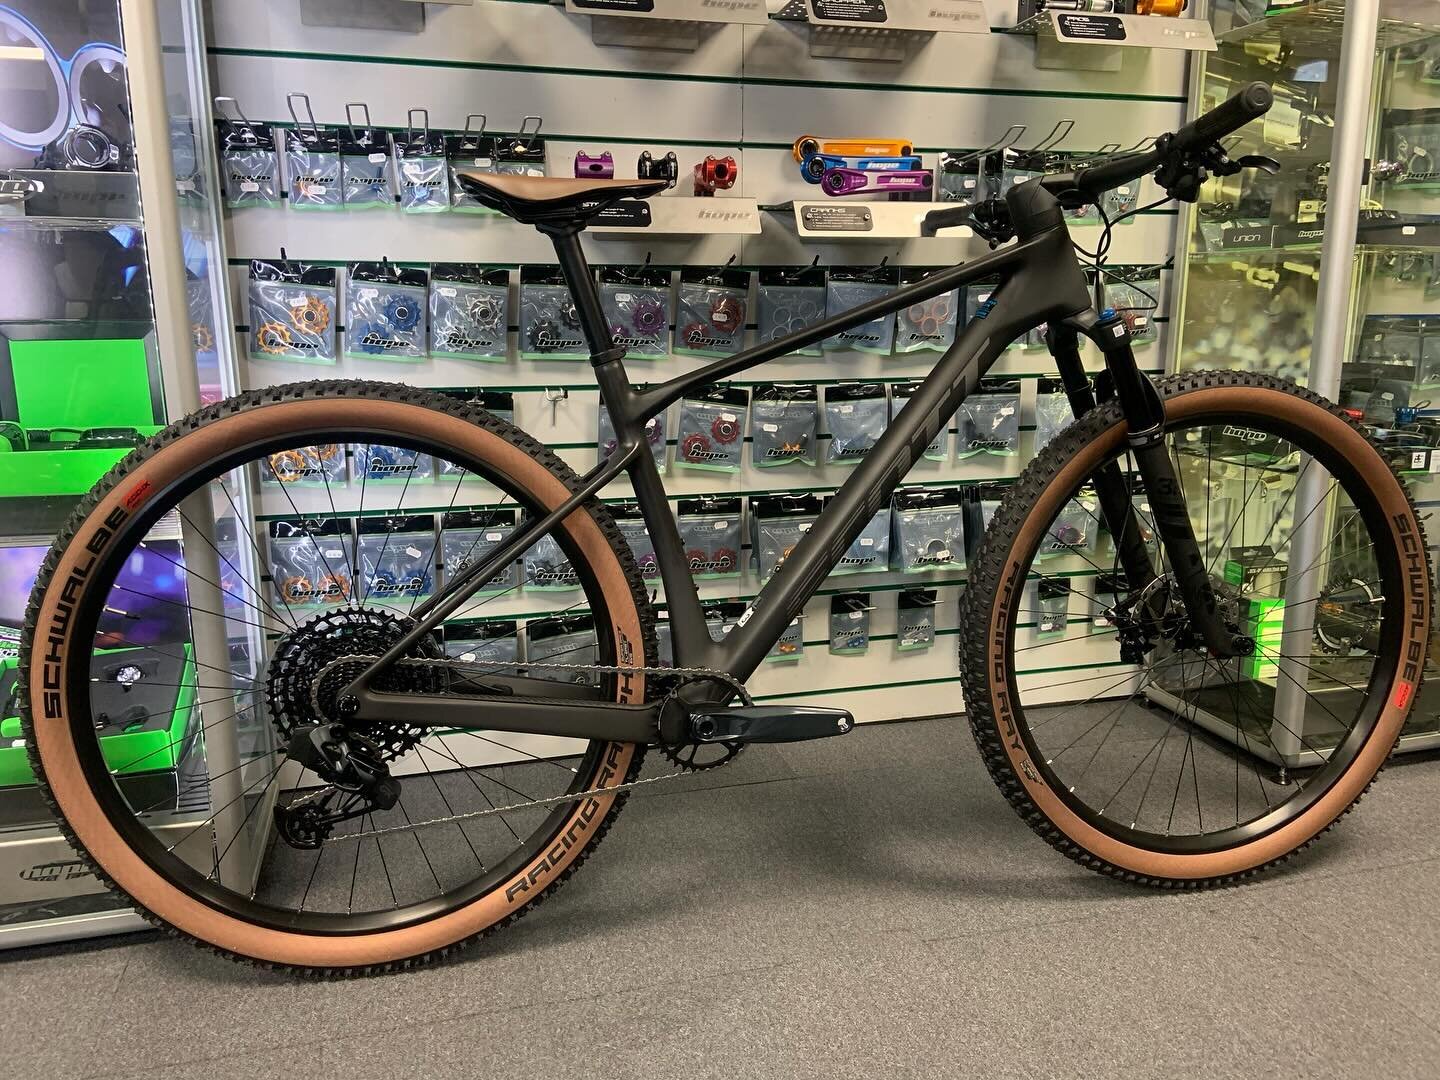 Another @bikeonscott #scale 910 leaving us this weekend. Amazing value Carbon #29er #hardtailmtb  #xc #mountainbike equipped with @foxmtb forks and @srammtb #axs all for &pound;2999.00
#localbikeshop #shoplocal #ridemoremtb #miltonkeynesbikeshop #mil